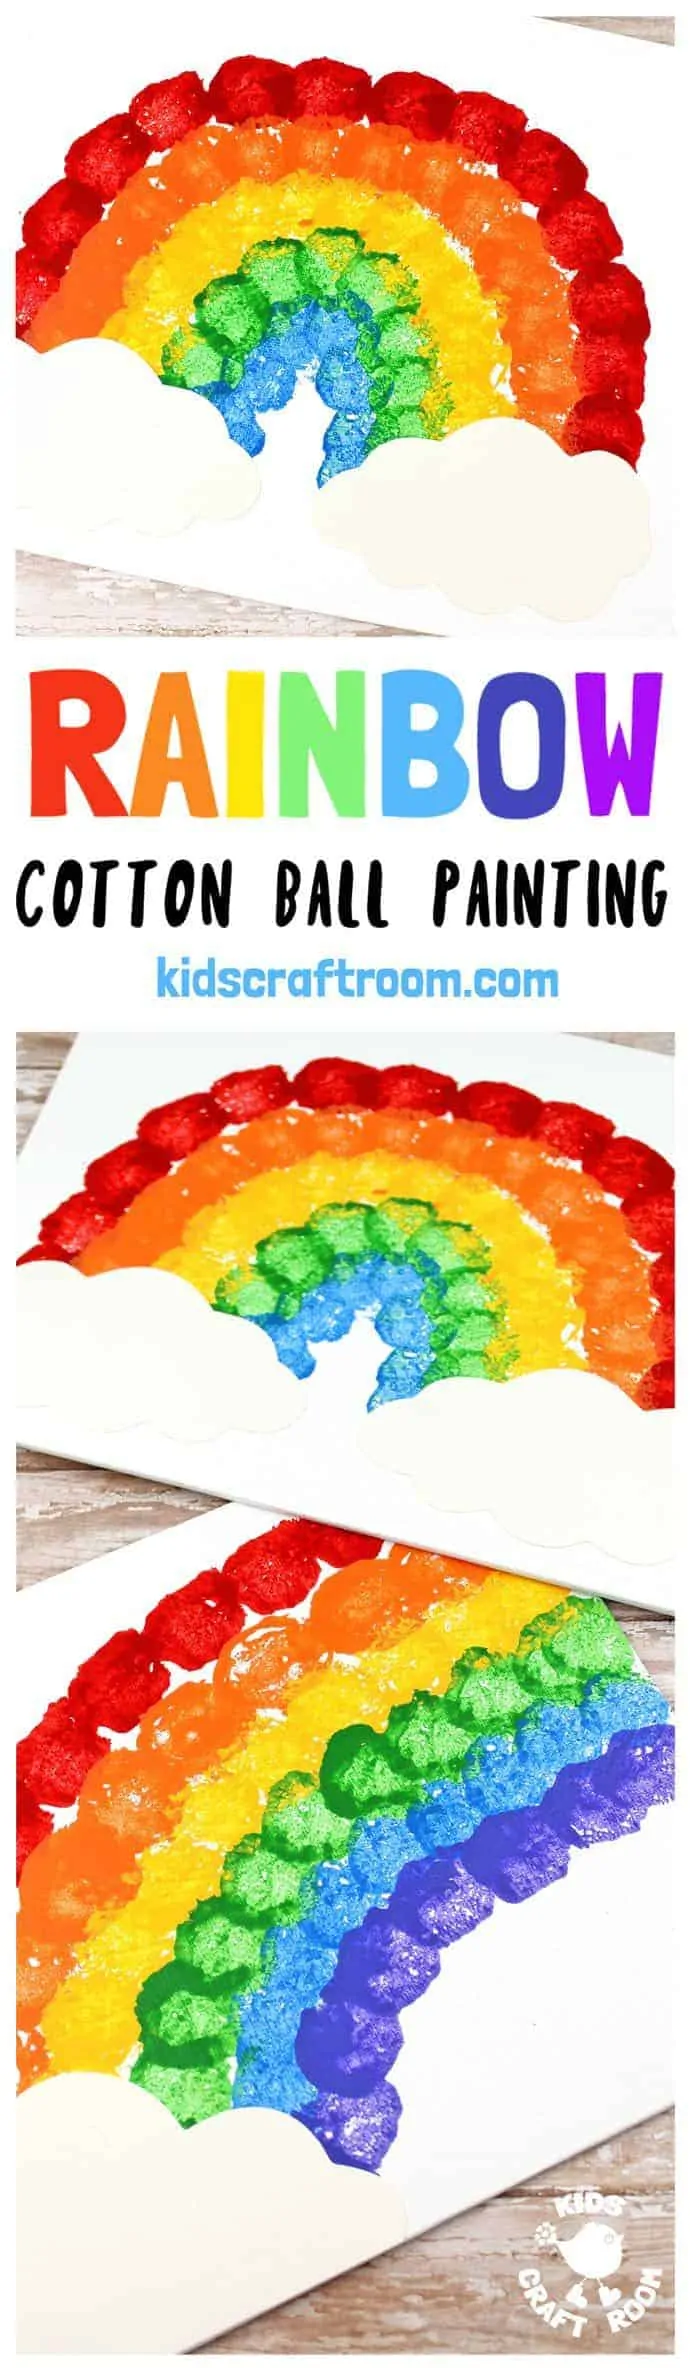 4 Cute Ideas with Cotton Balls